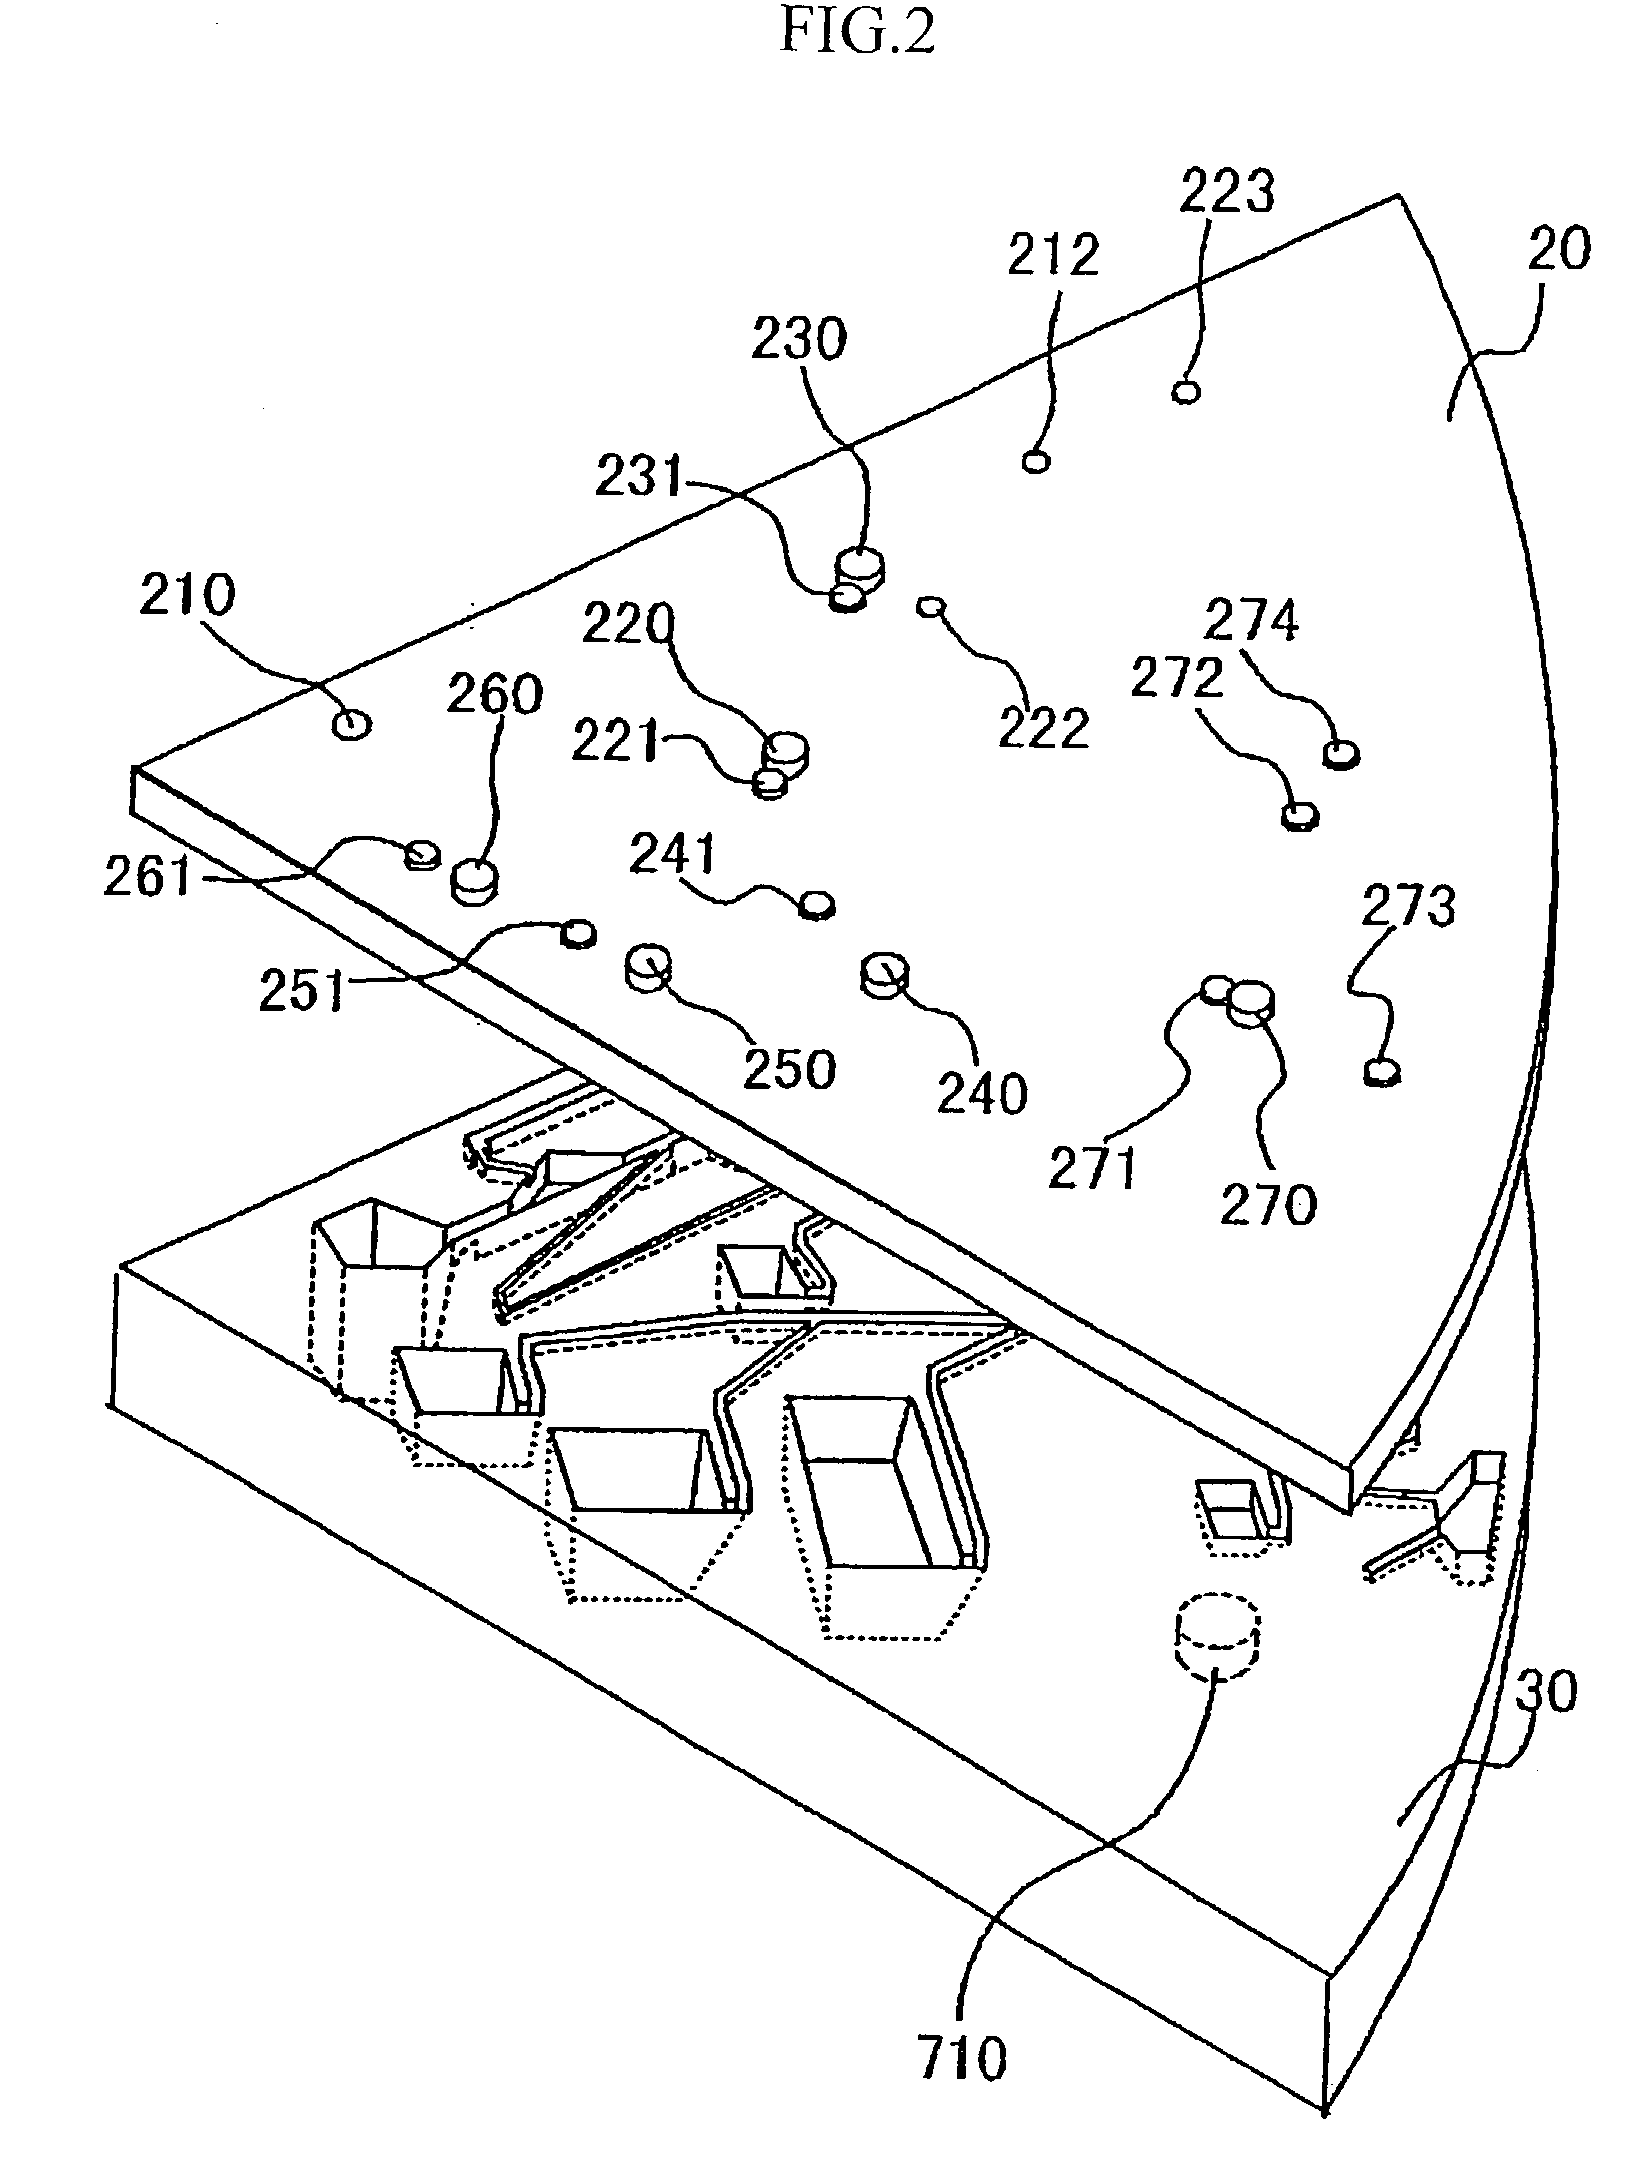 Chemical analysis apparatus and genetic diagnostic apparatus